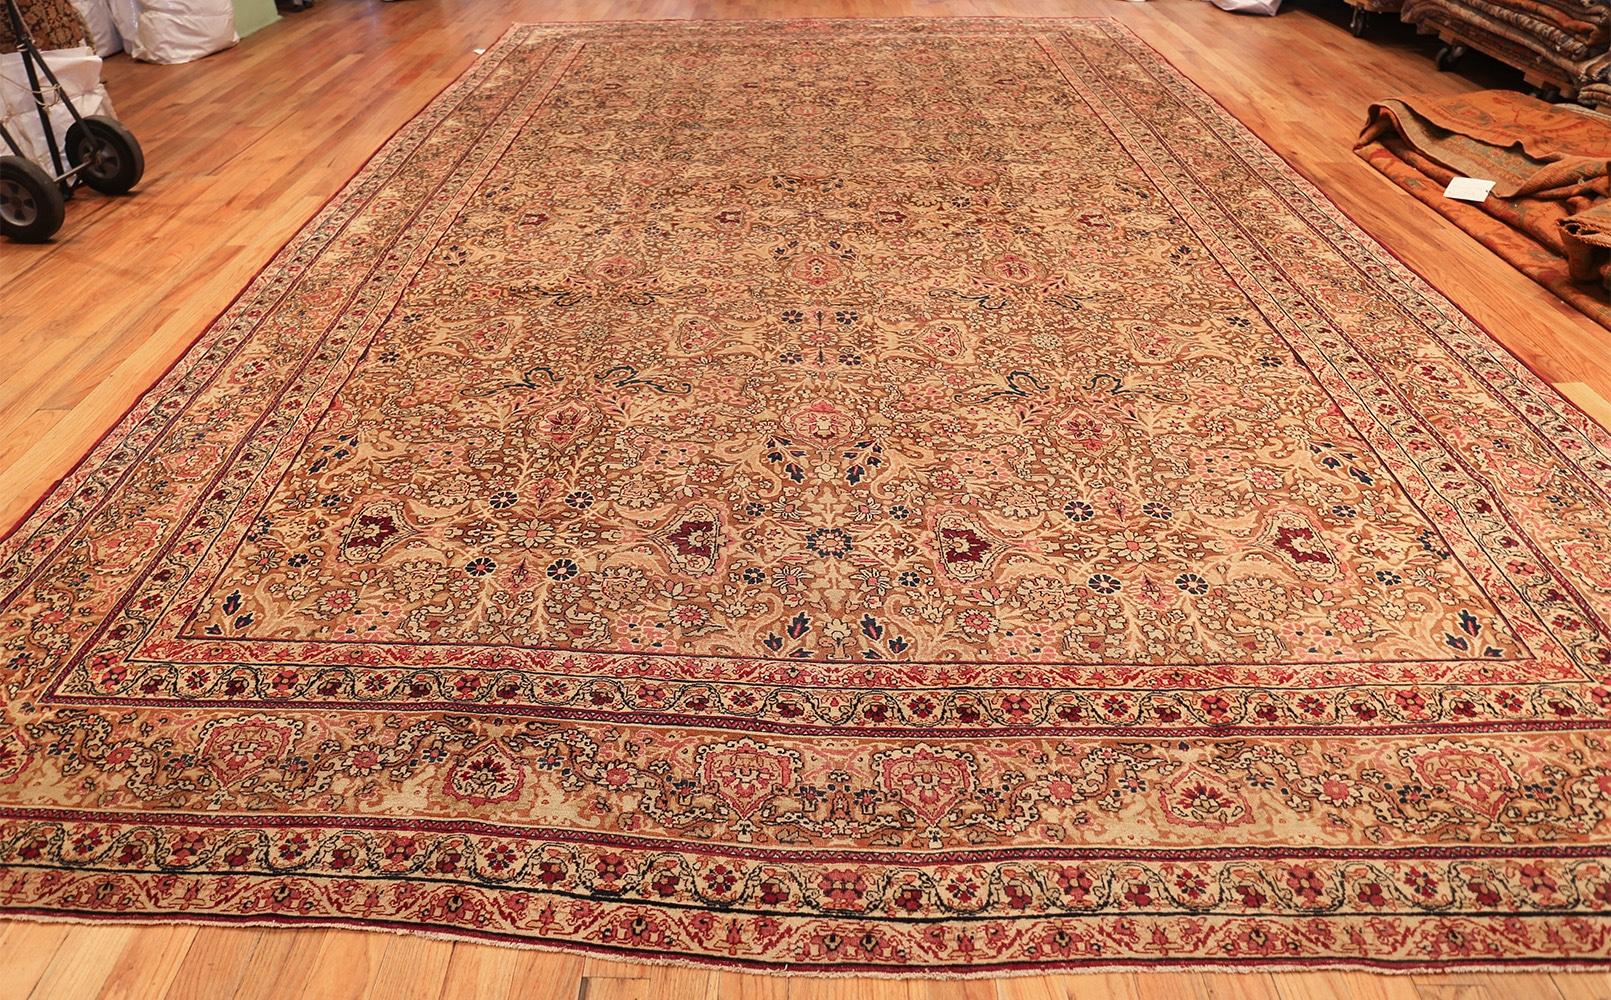 Antique Persian Kerman rug, country of origin: Persia, date circa late 19th century. Size: 11 ft. 6 in x 17 ft. 9 in (3.51 m x 5.41 m)

This incredible Kerman rug from the late 19th century pays homage to the exquisite artistry and skill of the